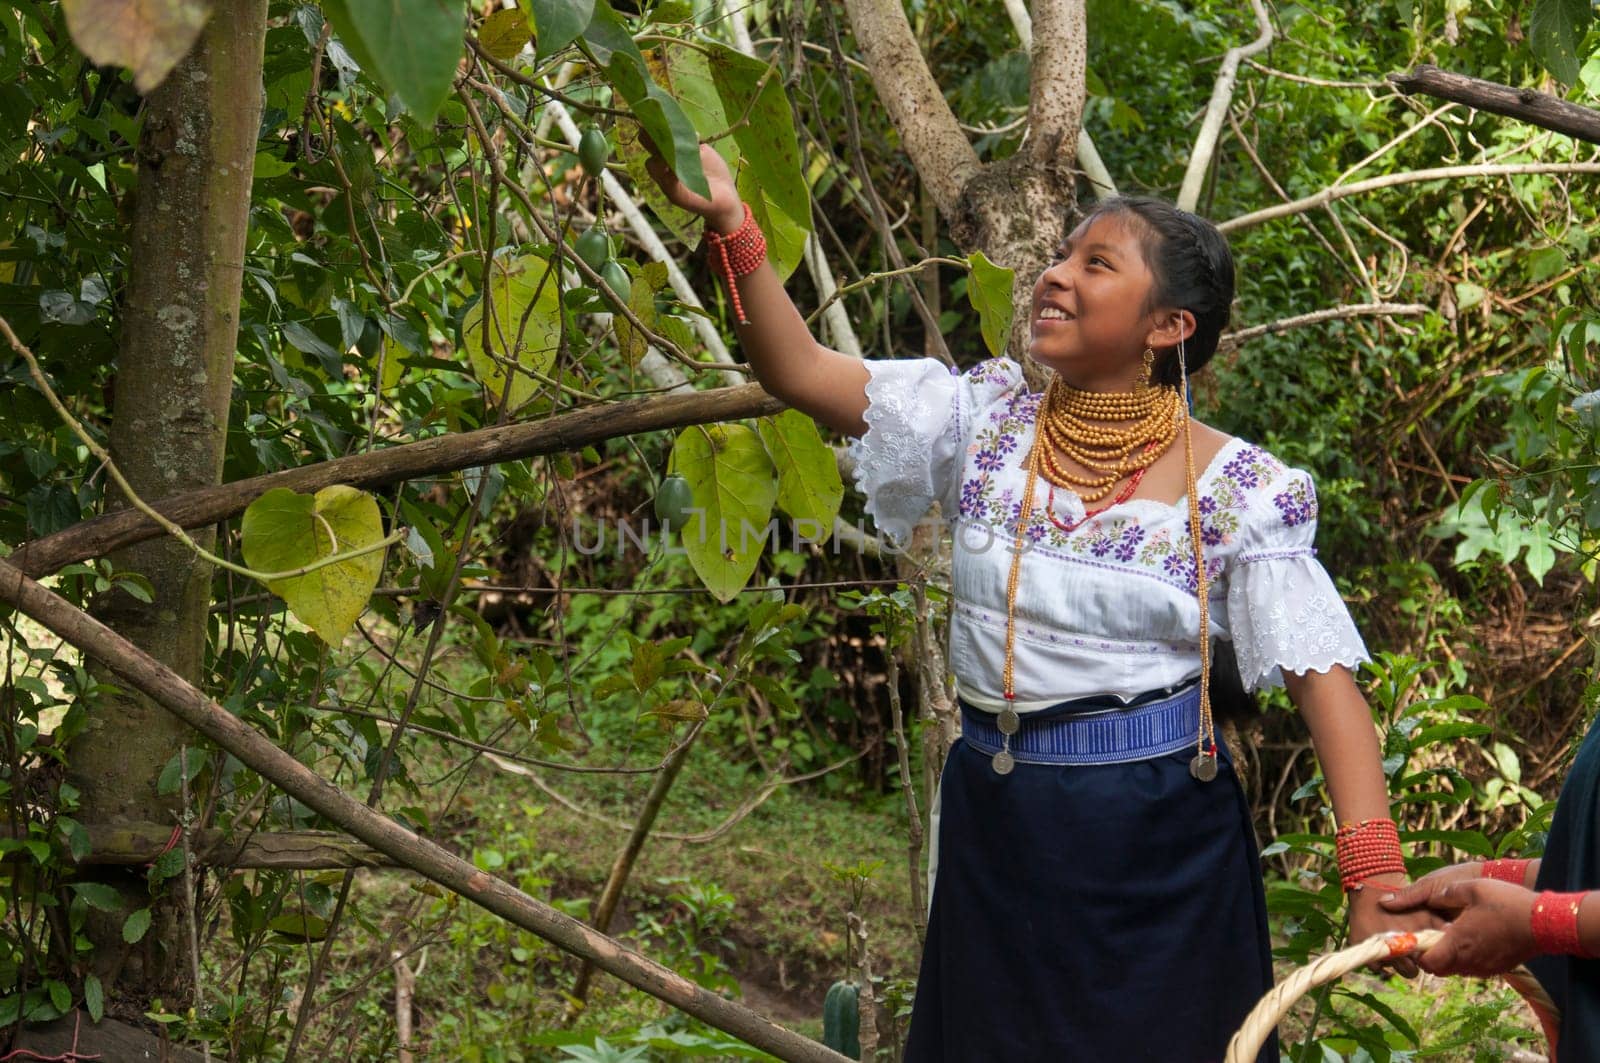 Ecuadorian Joy: A Young Gal in Traditional Attire Pickin' Wild Fruits with a Smile in the Jungle by Raulmartin